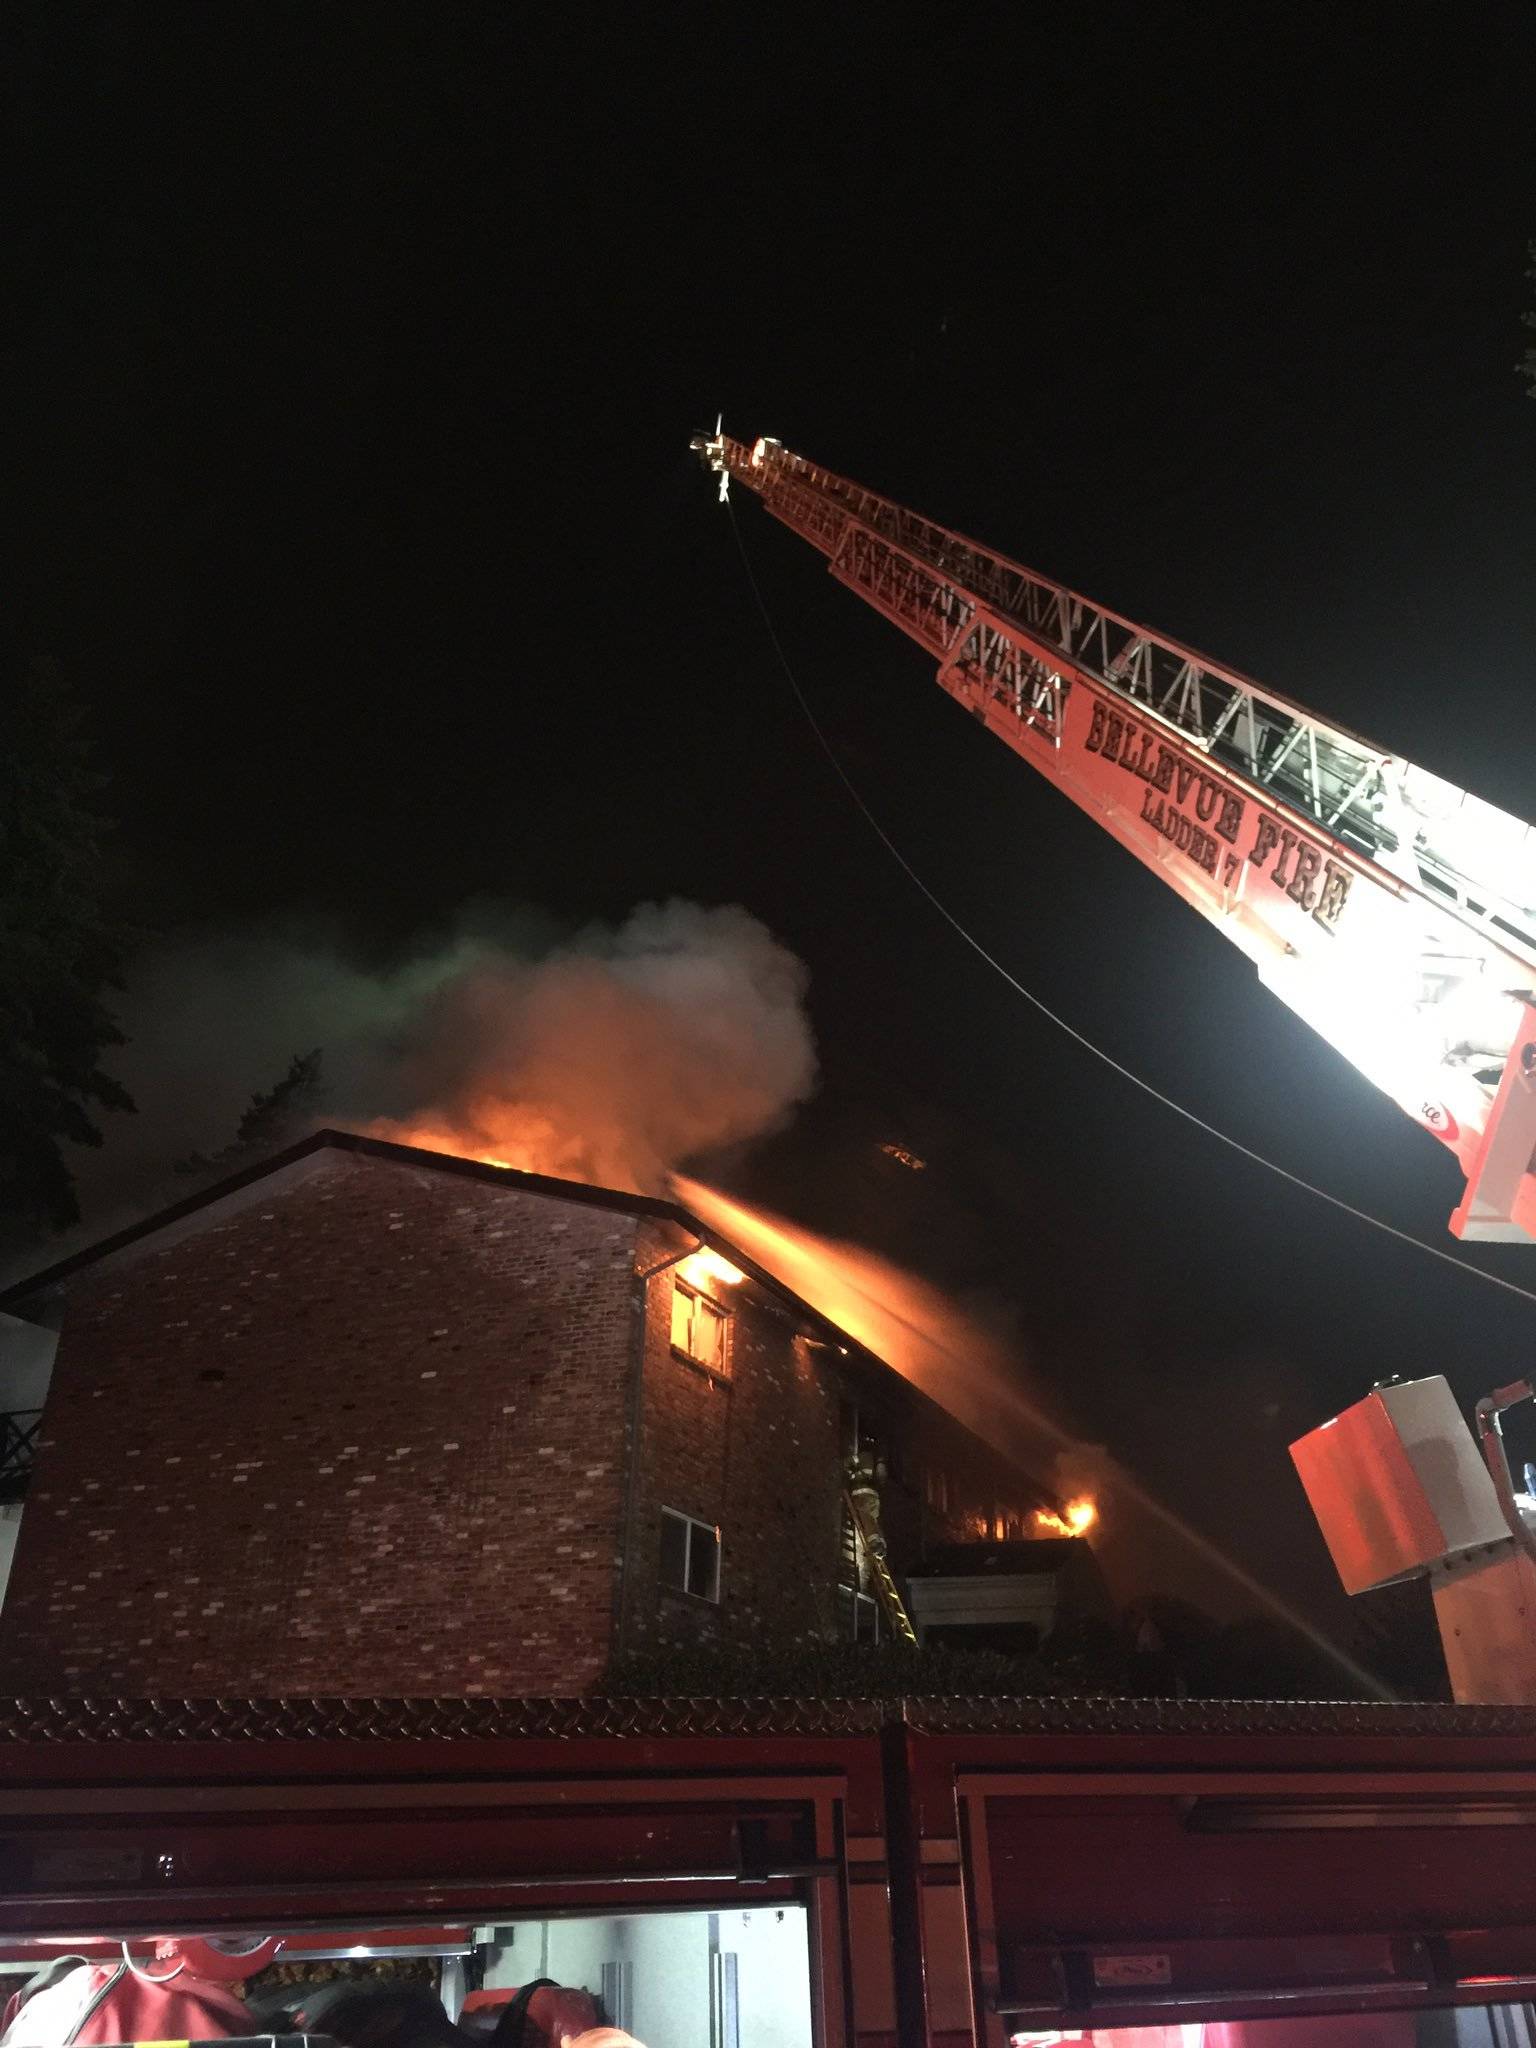 Fatal Chimney Condo fire in Downtown Bellevue ruled an accident